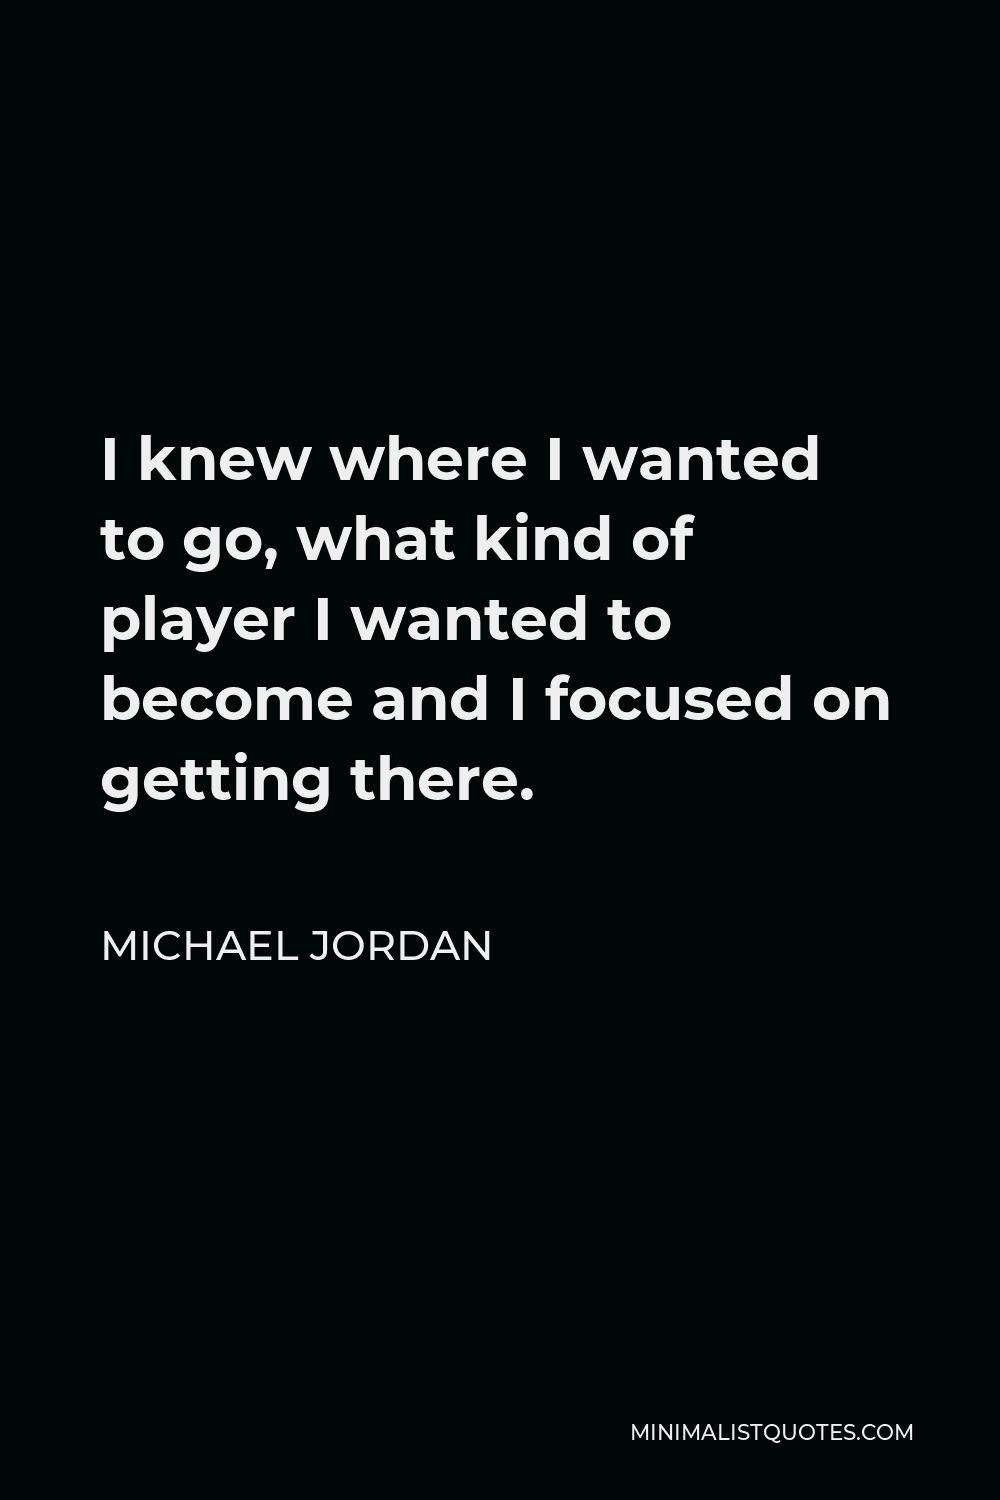 Michael Jordan Quote - I knew where I wanted to go, what kind of player I wanted to become and I focused on getting there.